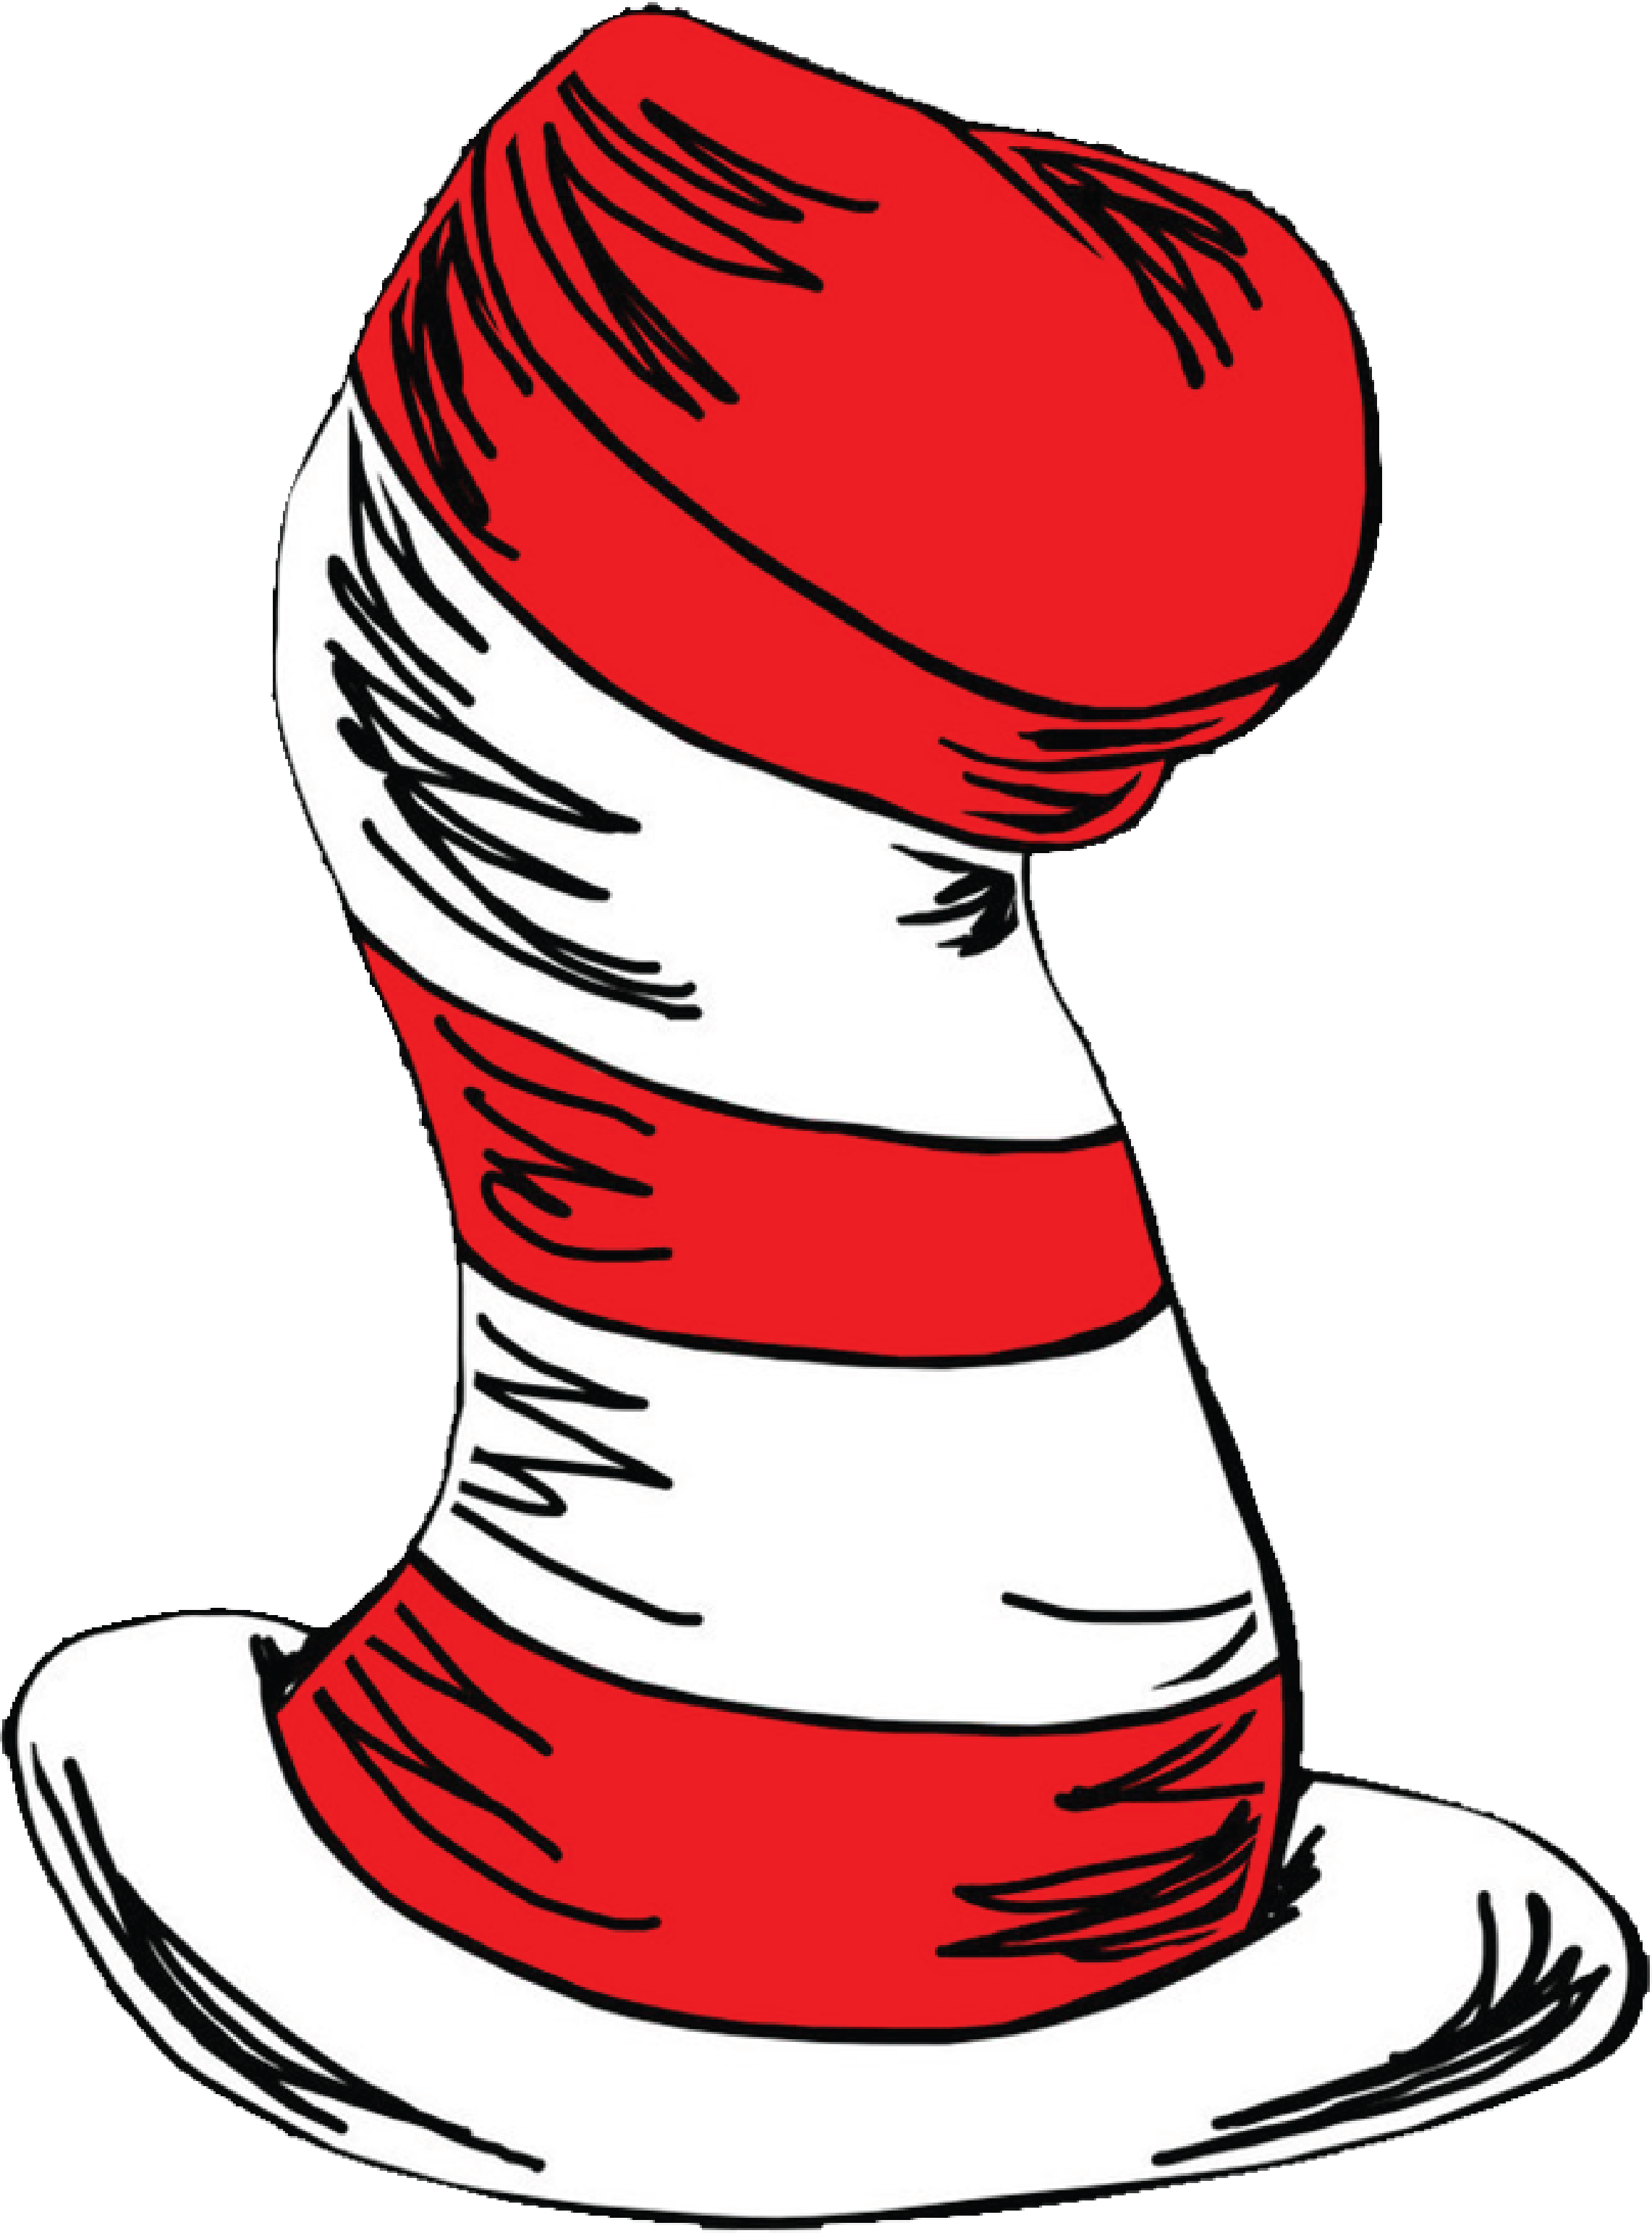 The Cat In The Hat Green Eggs And Ham Clip Art Dr Seuss Png Download 2283 3086 Free